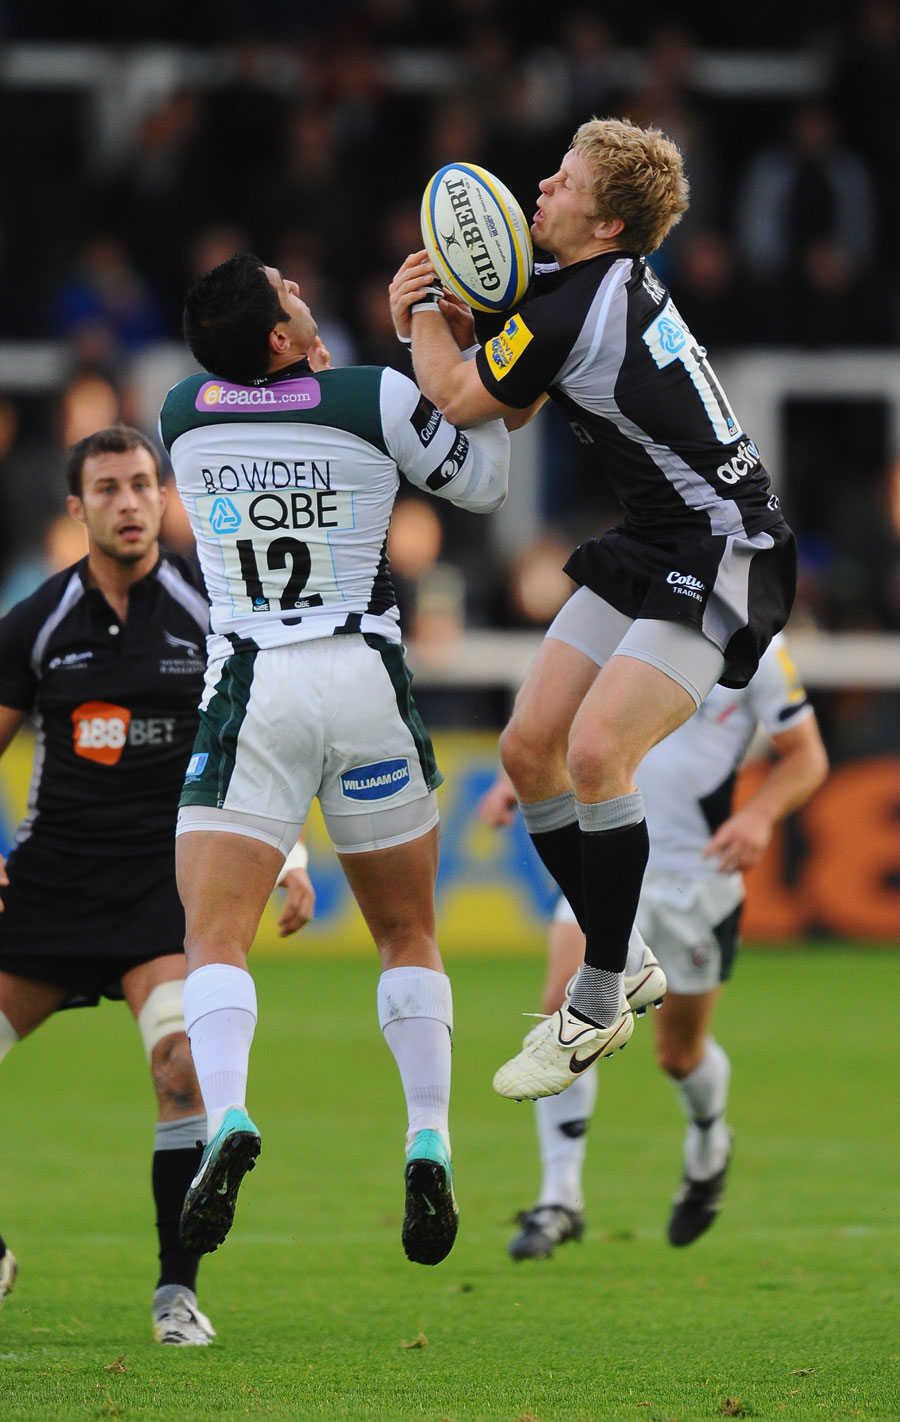 Newcastle's Alex Tait vies with Dan Bowden for a high ball